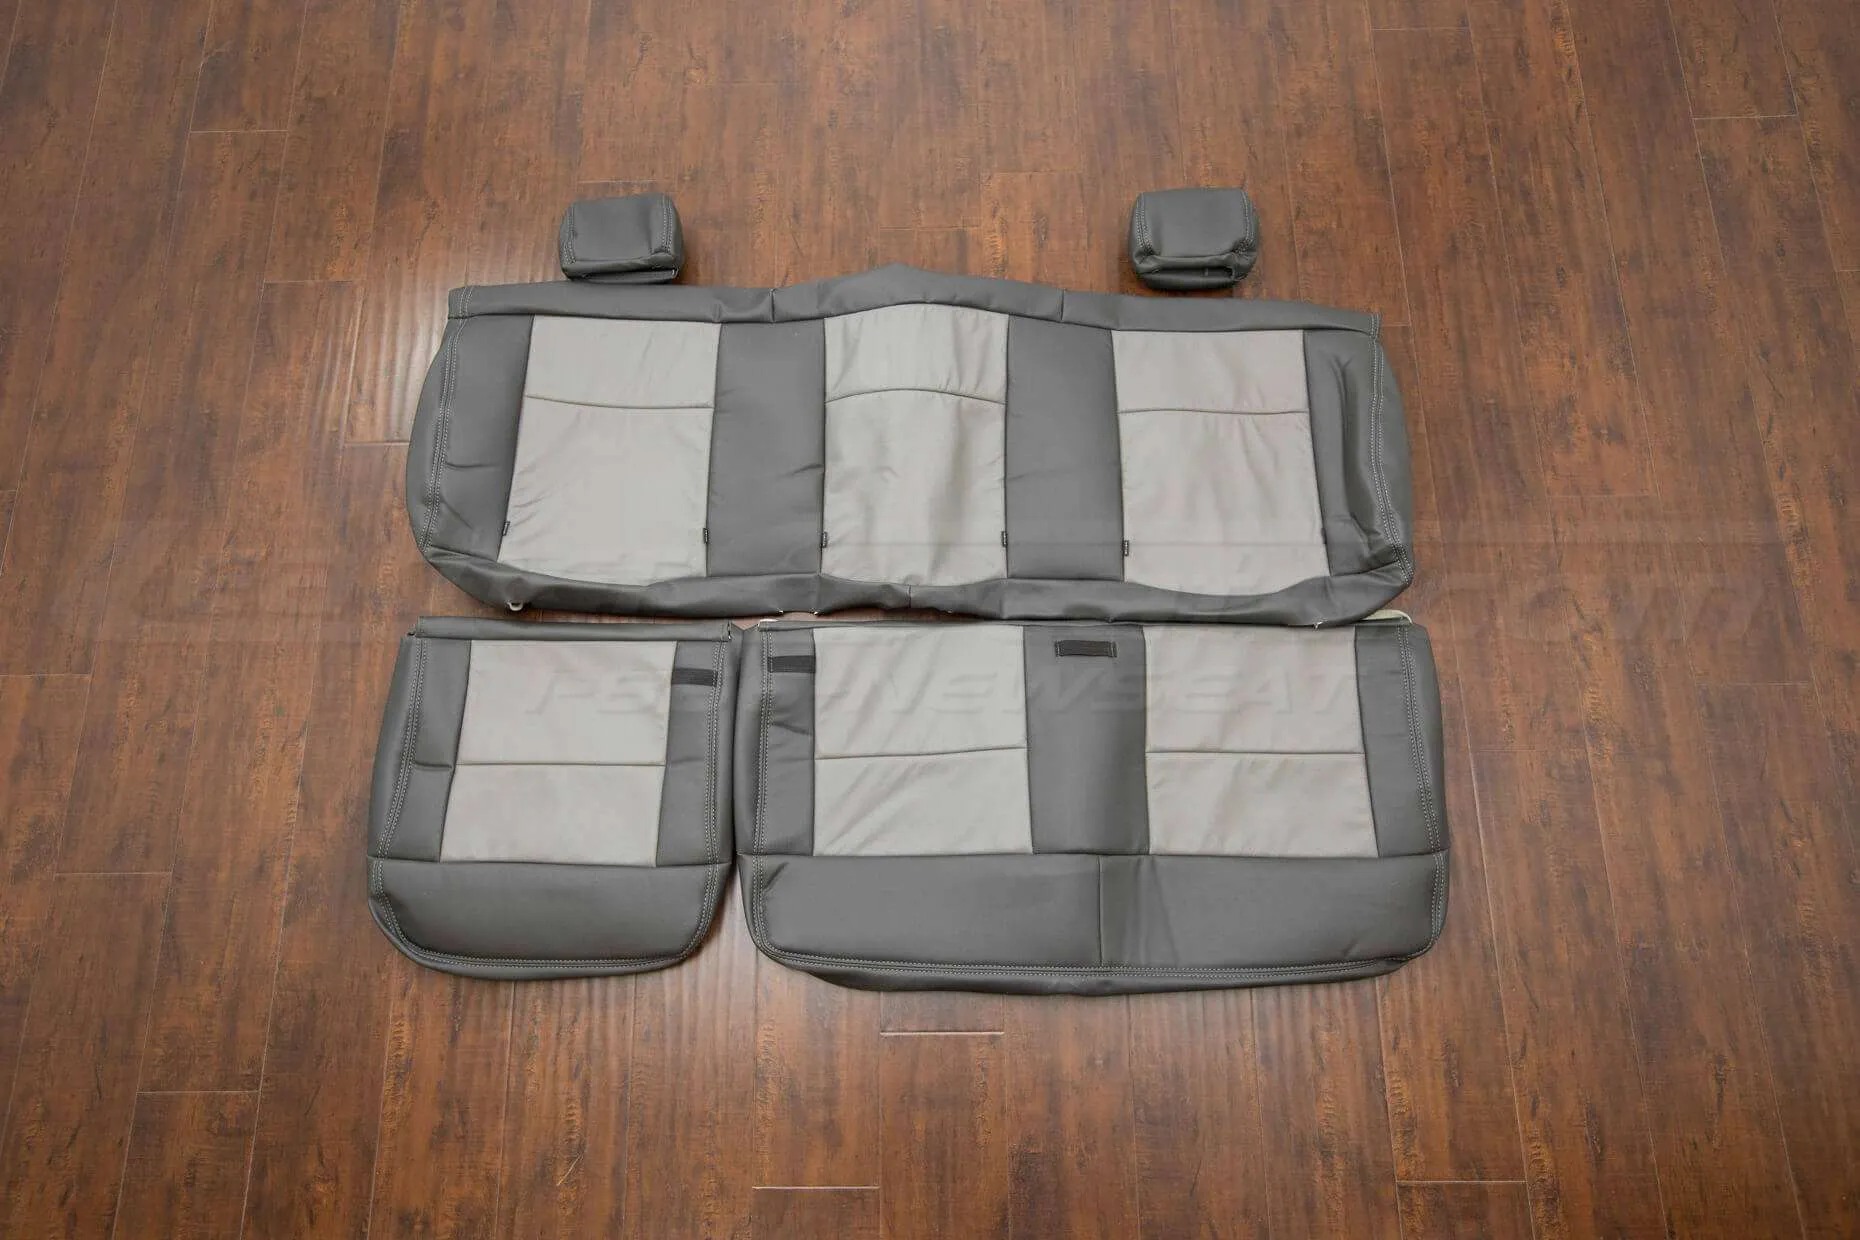 Ford F-150 Upholstery Kit - Graphite & Stone - Rear seats